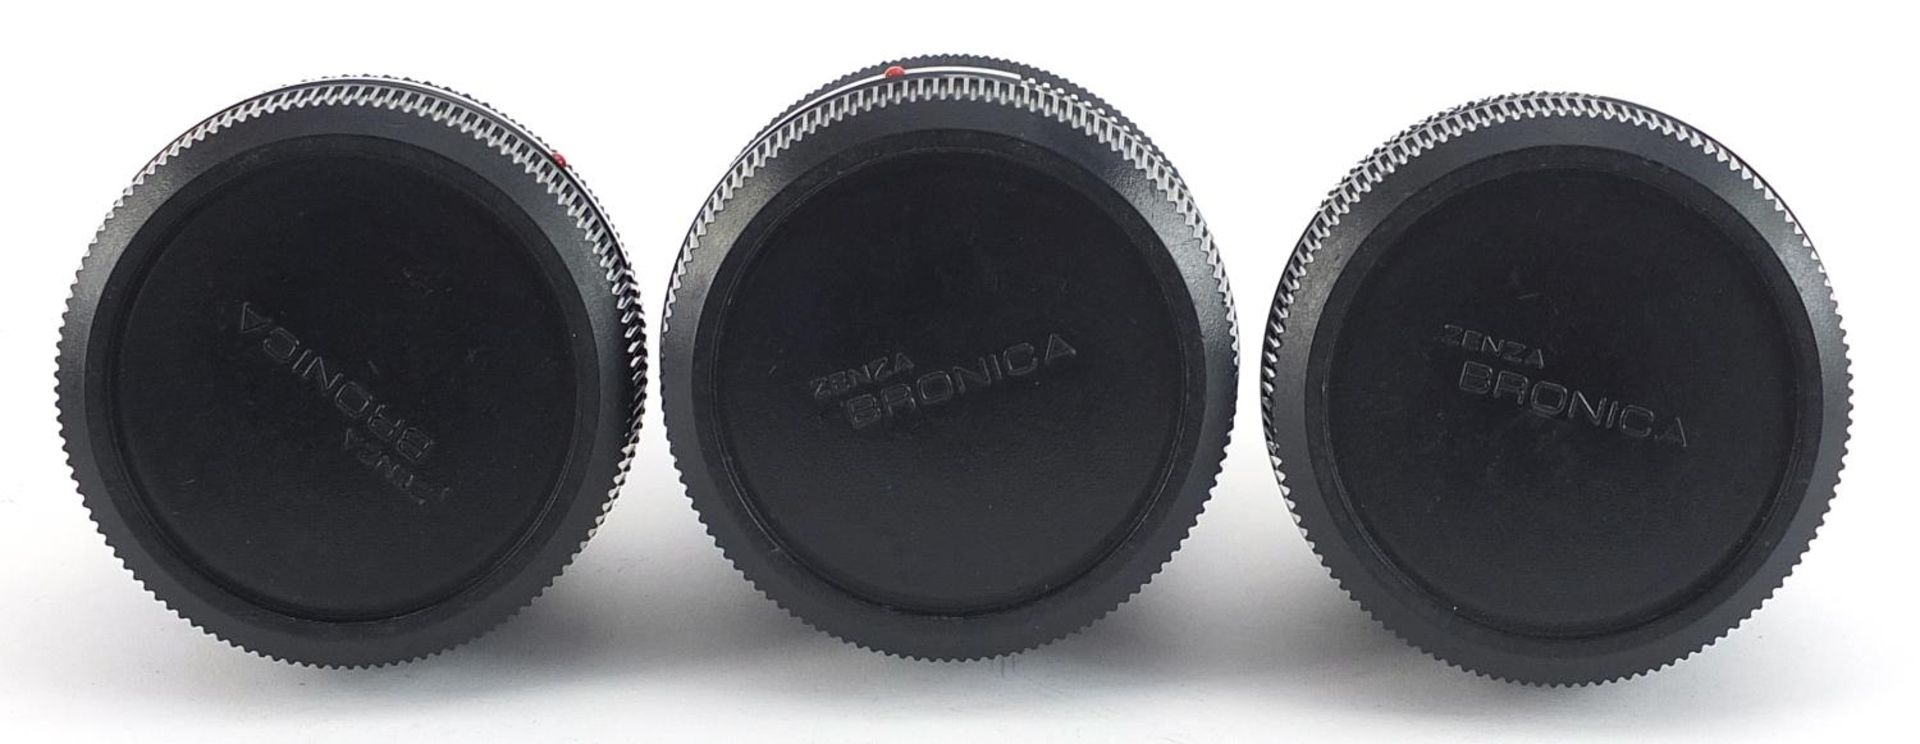 Three Zenza Bronica camera lenses and parts comprising 150mm, 40mm and 50mm - Image 4 of 4